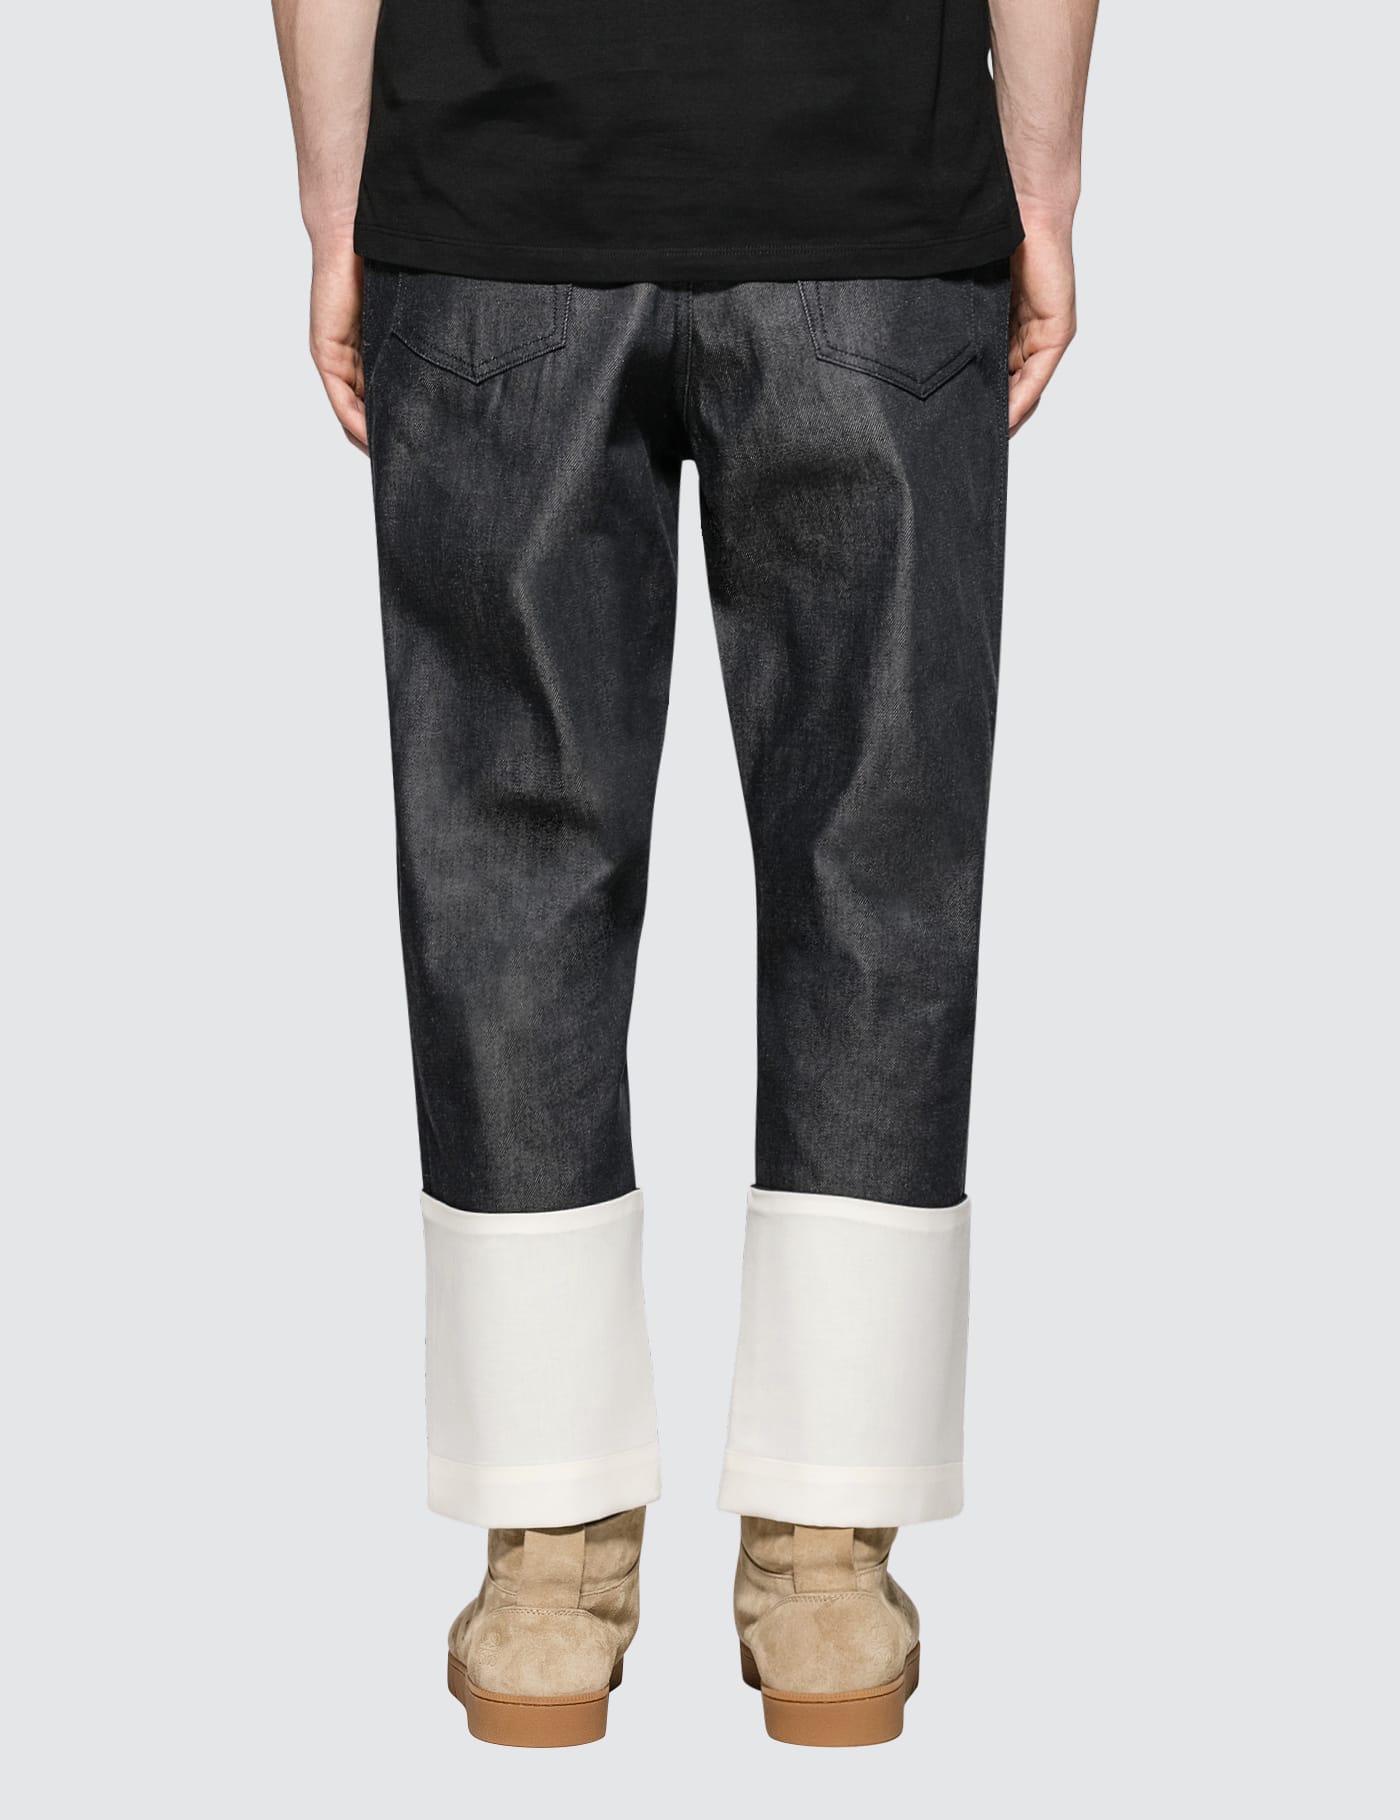 Loewe - Fisherman Jeans | HBX - Globally Curated Fashion and Lifestyle by  Hypebeast